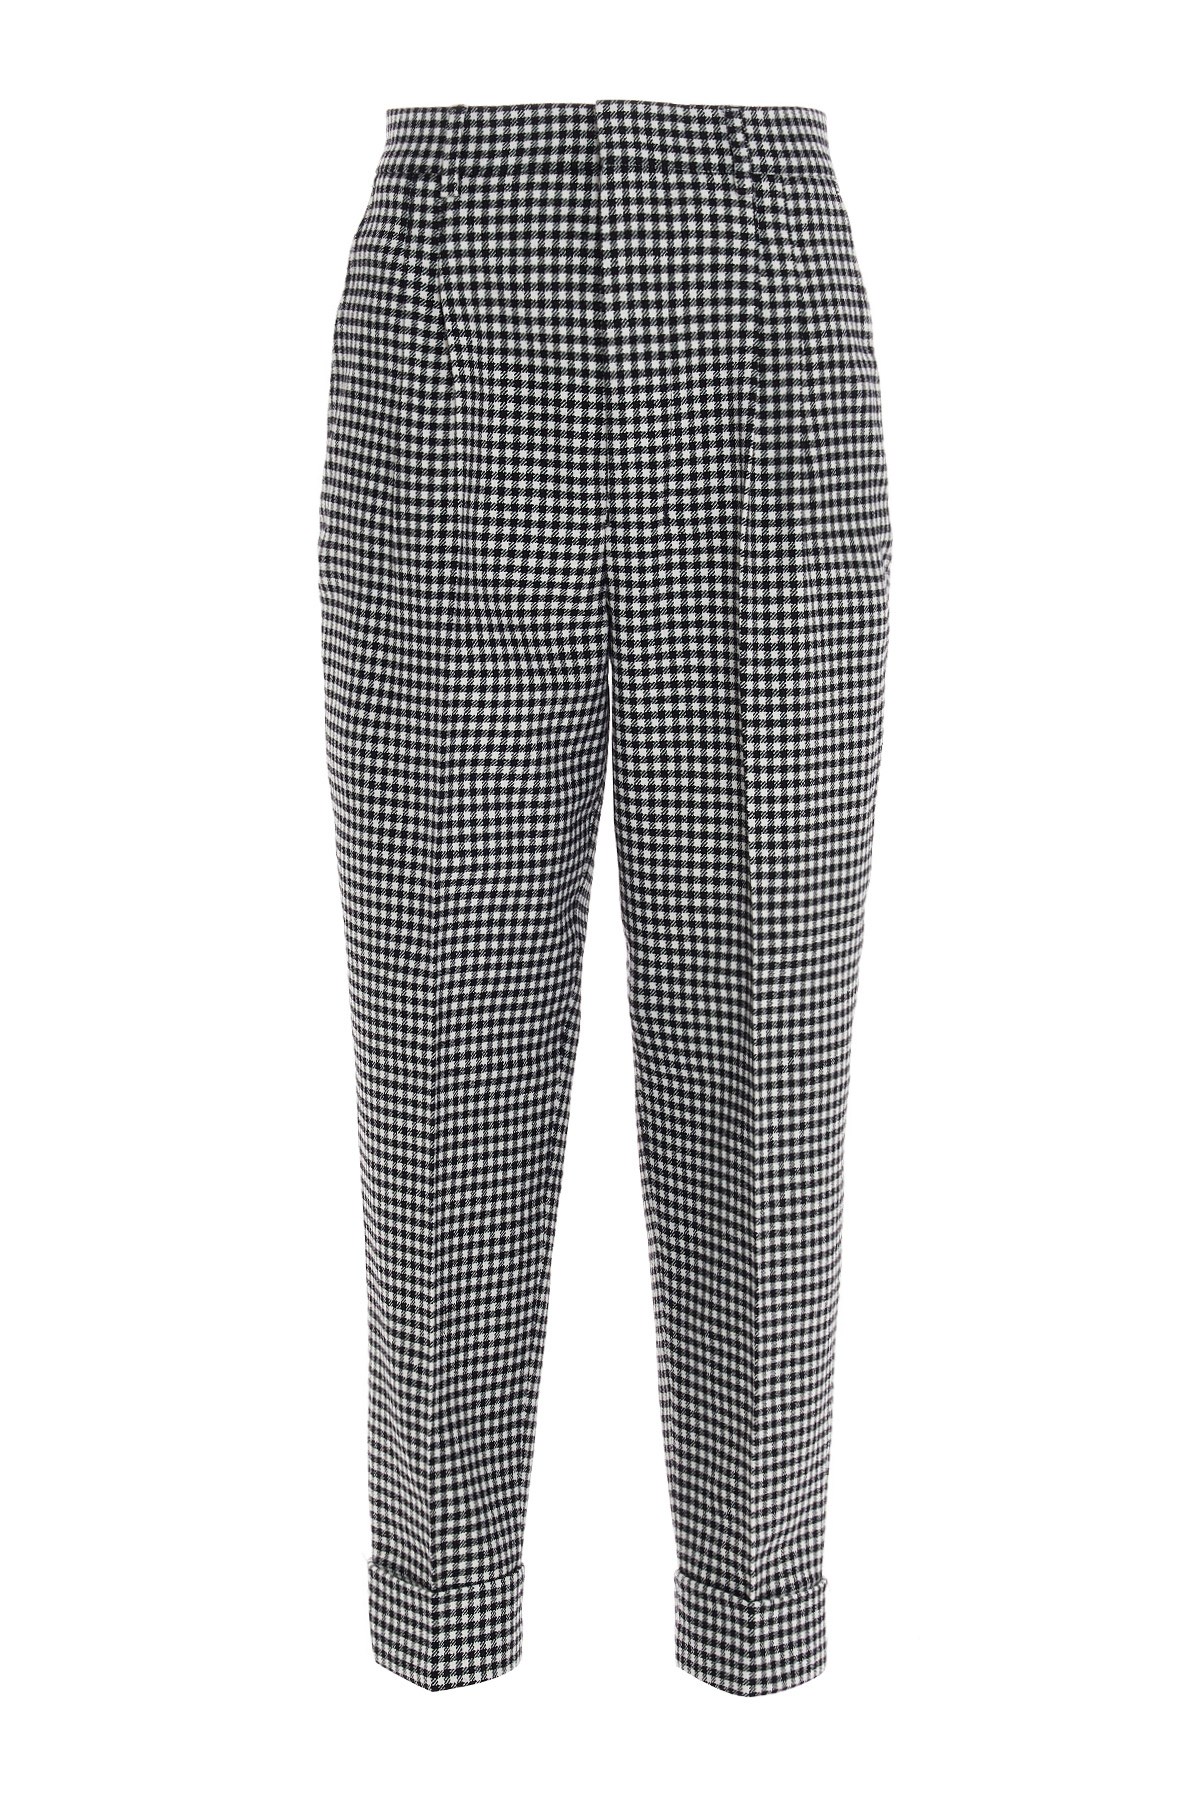 AMI PARIS All Over Check Wool Pants